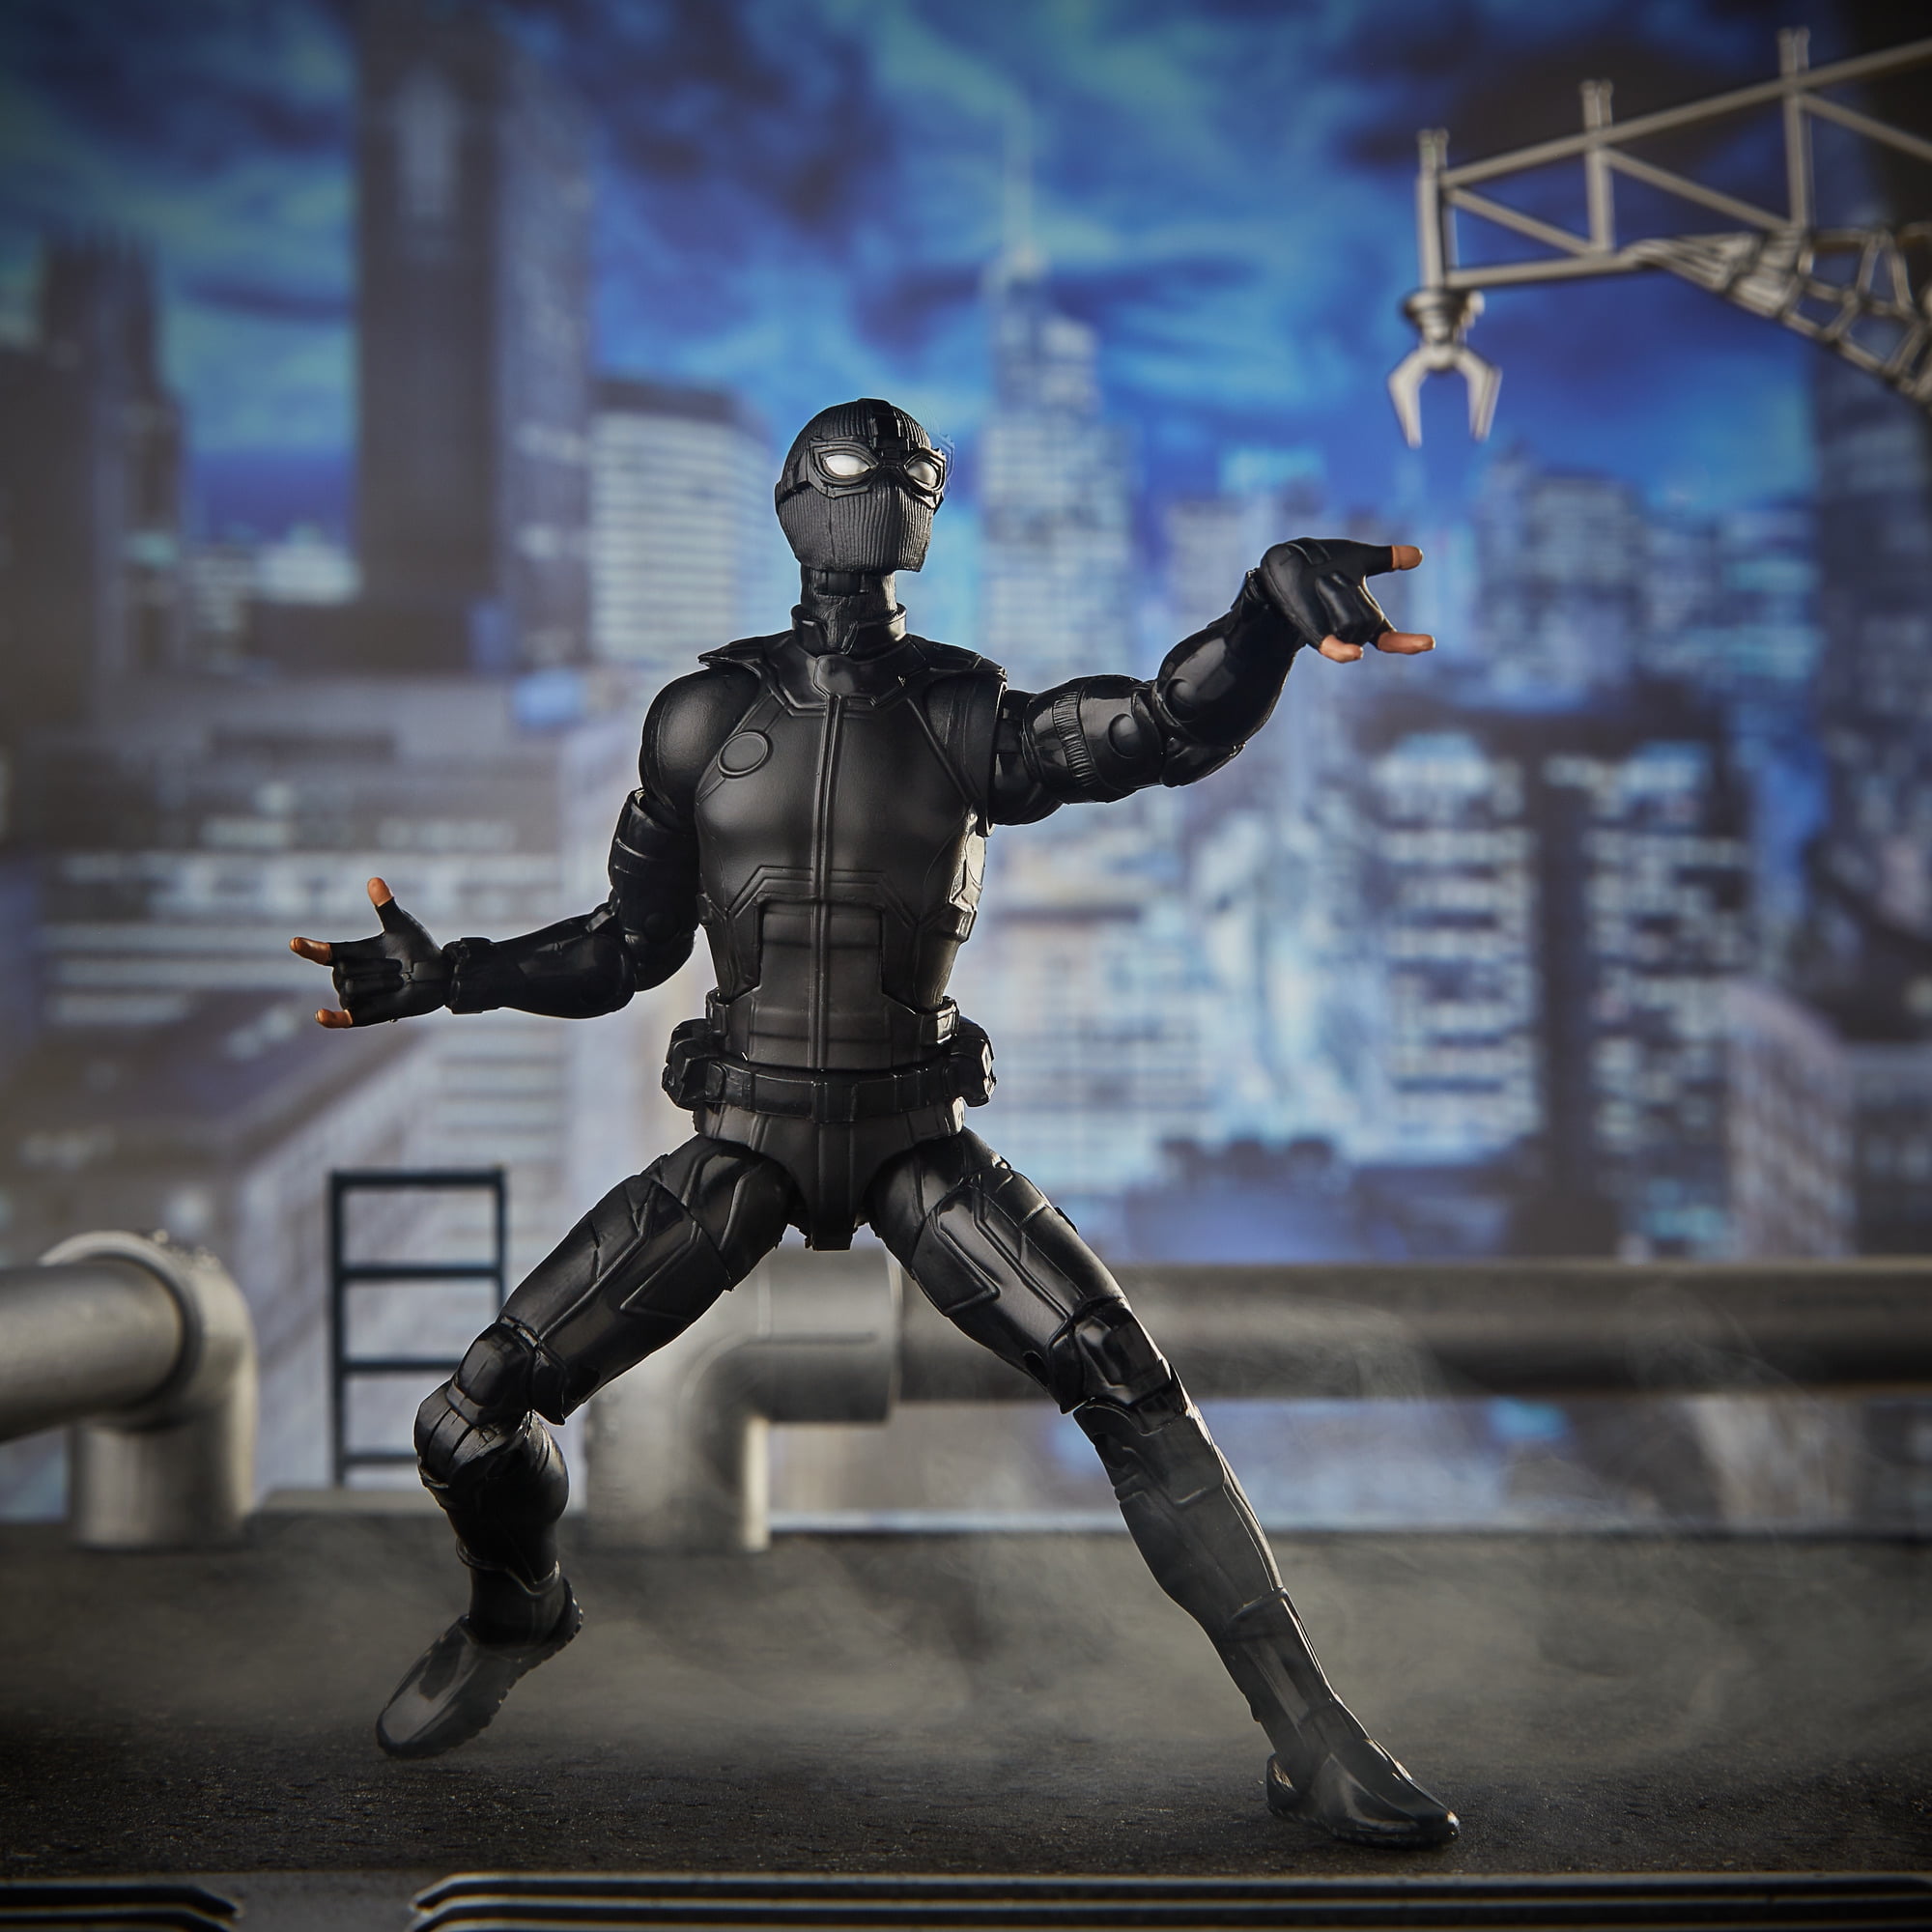 Spider-Man Stealth Suit Spider:Man Far From Home (Deluxe Version) - Marvel  Hot Toys Collectibles 1/6 Scale Action Figure